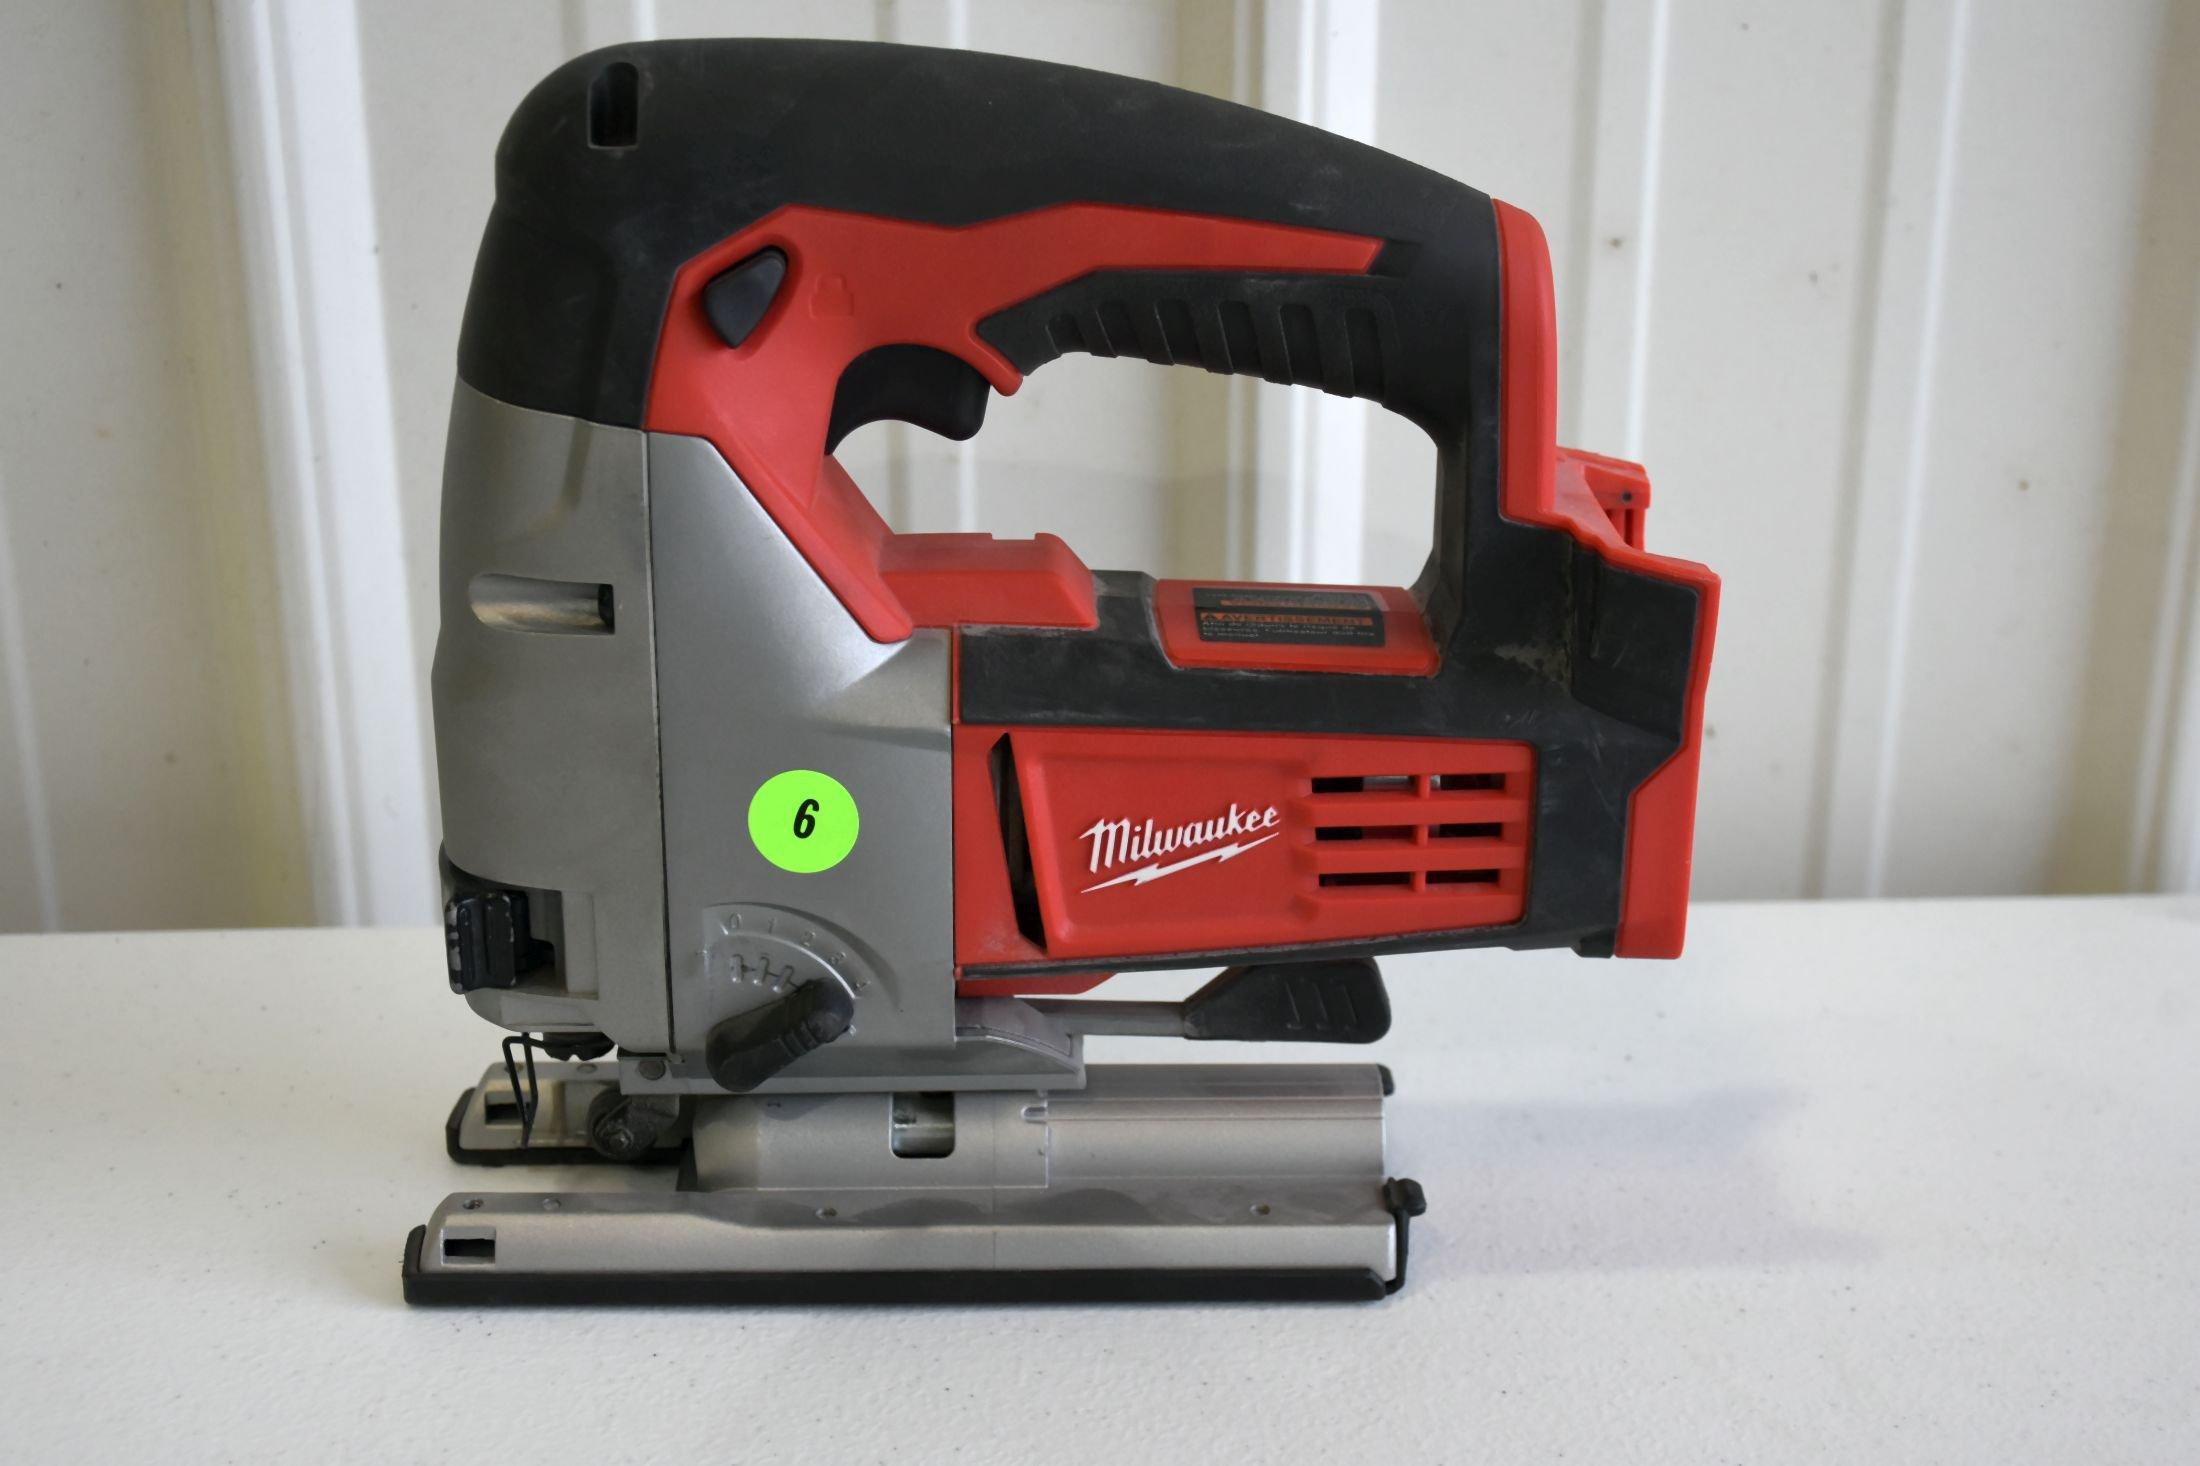 Milwaukee Jig Saw, No Battery, Working Condition